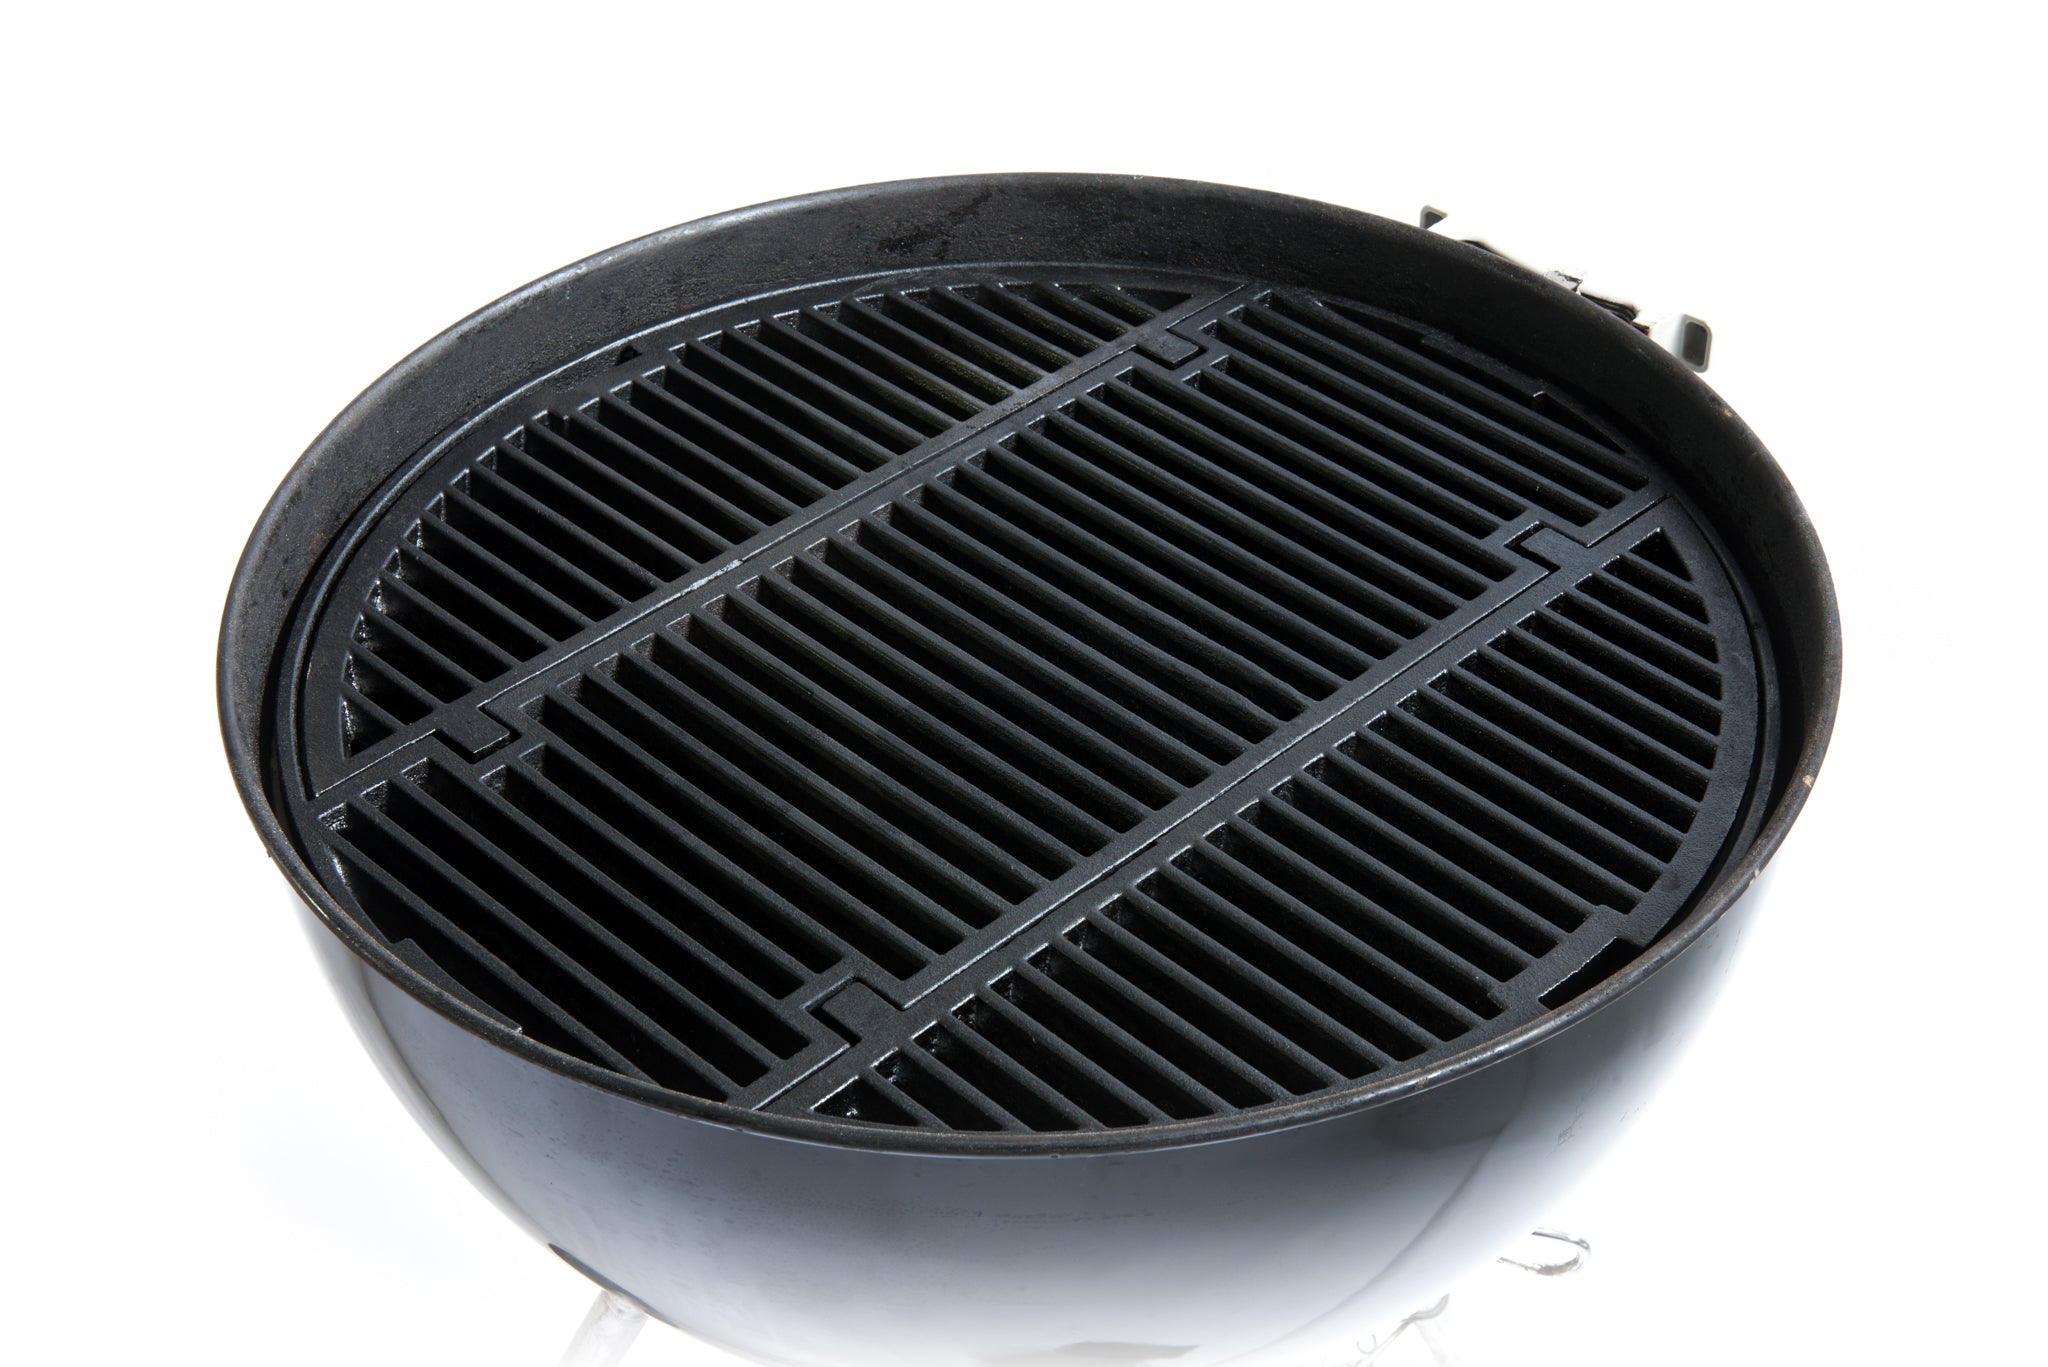 Malory M1 Cast Iron Grate for Most 22 Kettle Grills